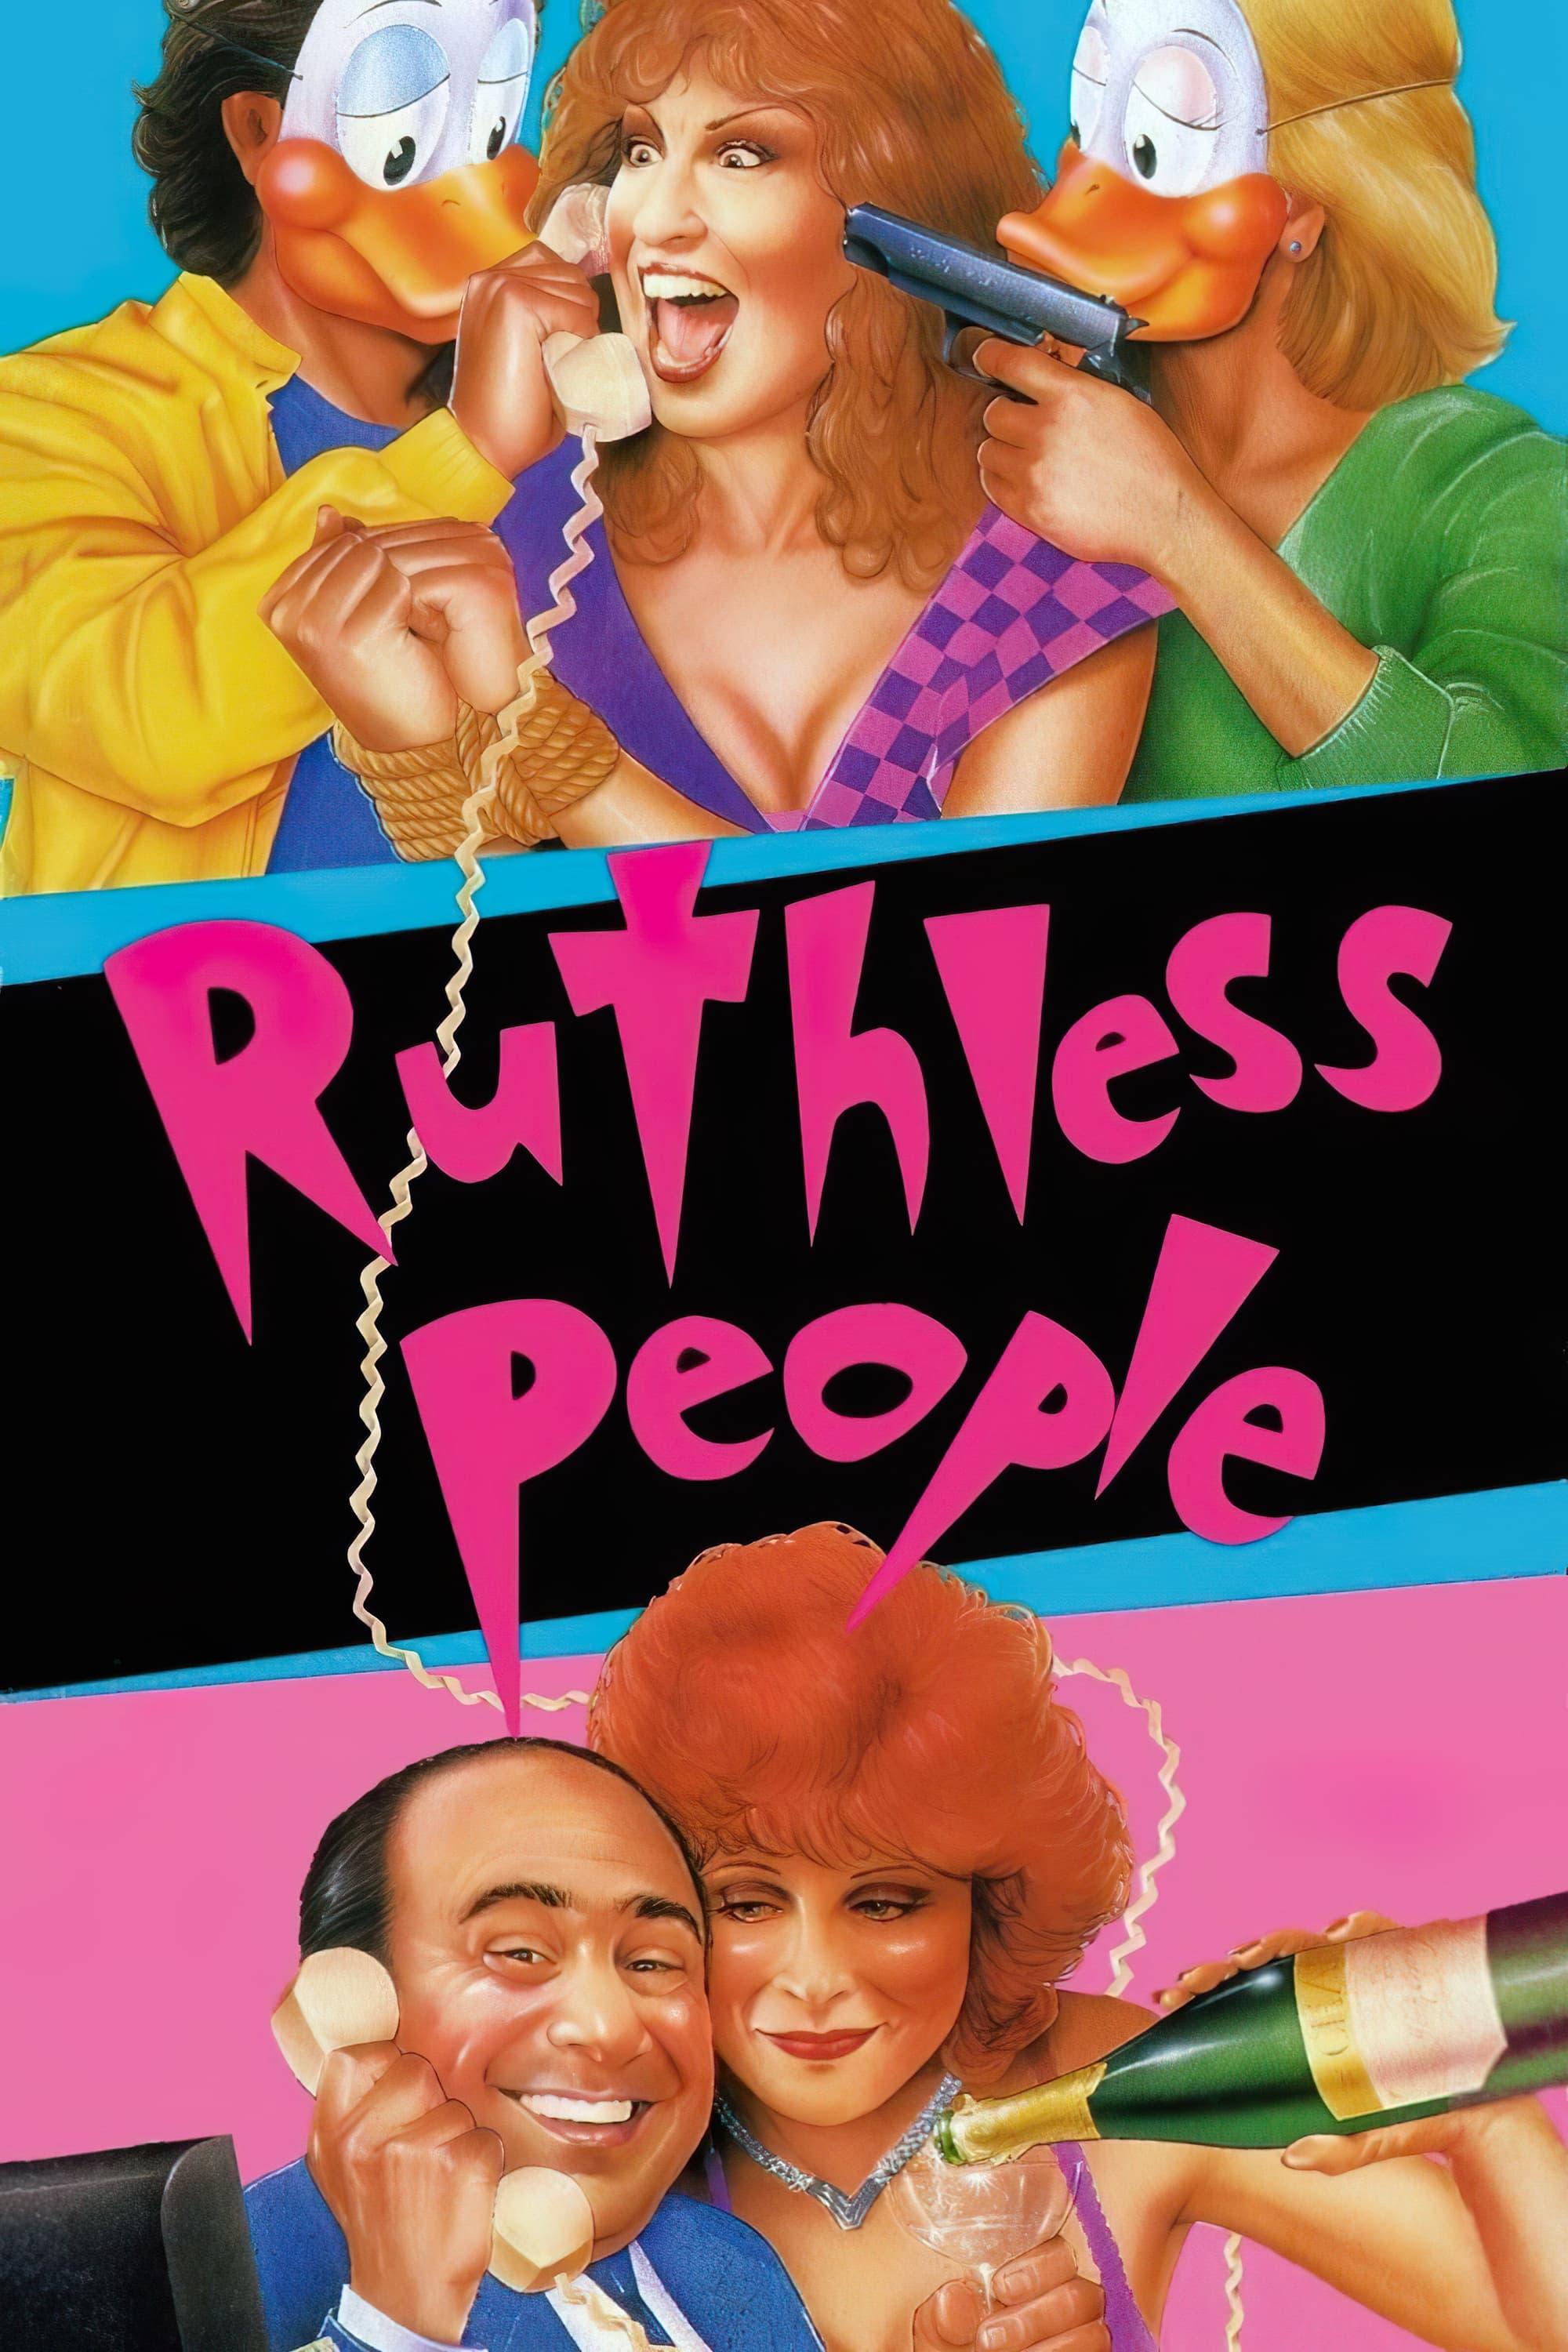 Ruthless People poster